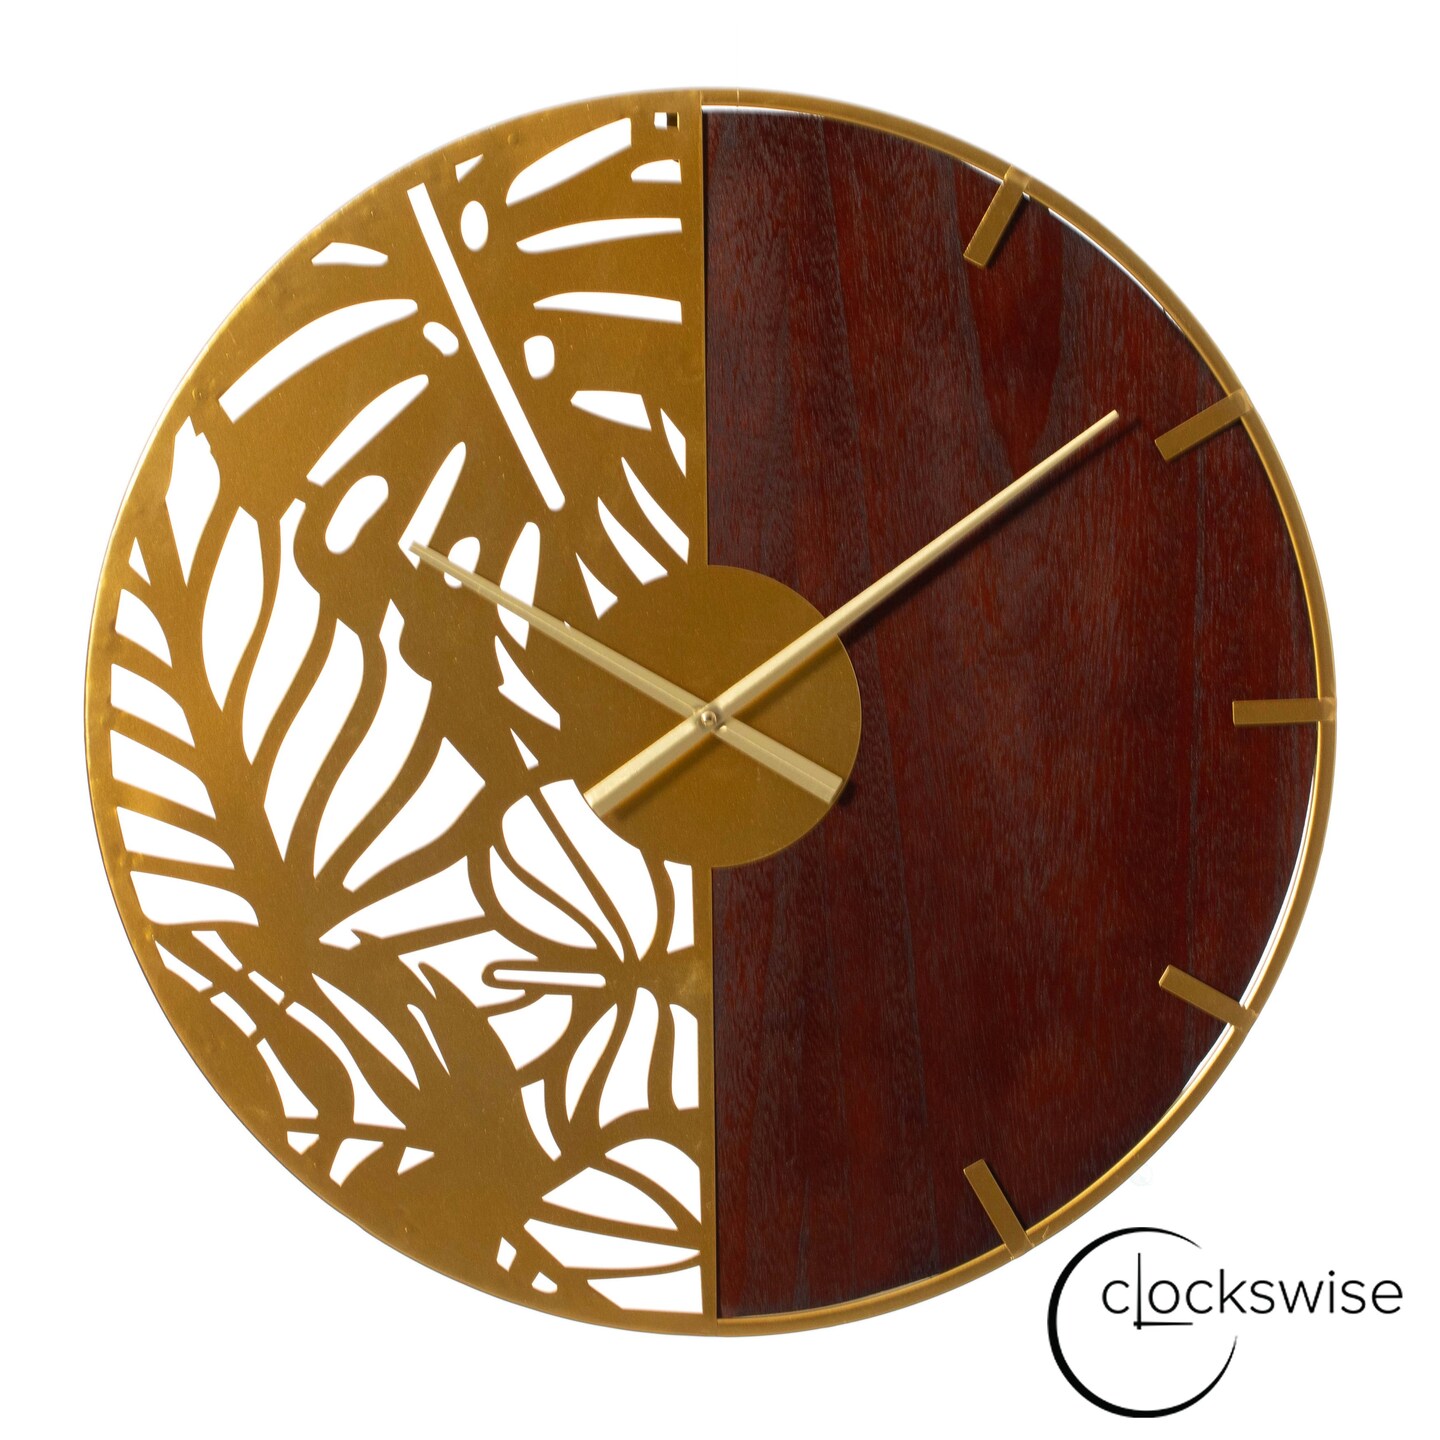 Clockswise 23.6 Modern Round Big Wall Clock Decorative brown wood and gold Metal with Leaf Cutout Oversize Timepiece for Entryway